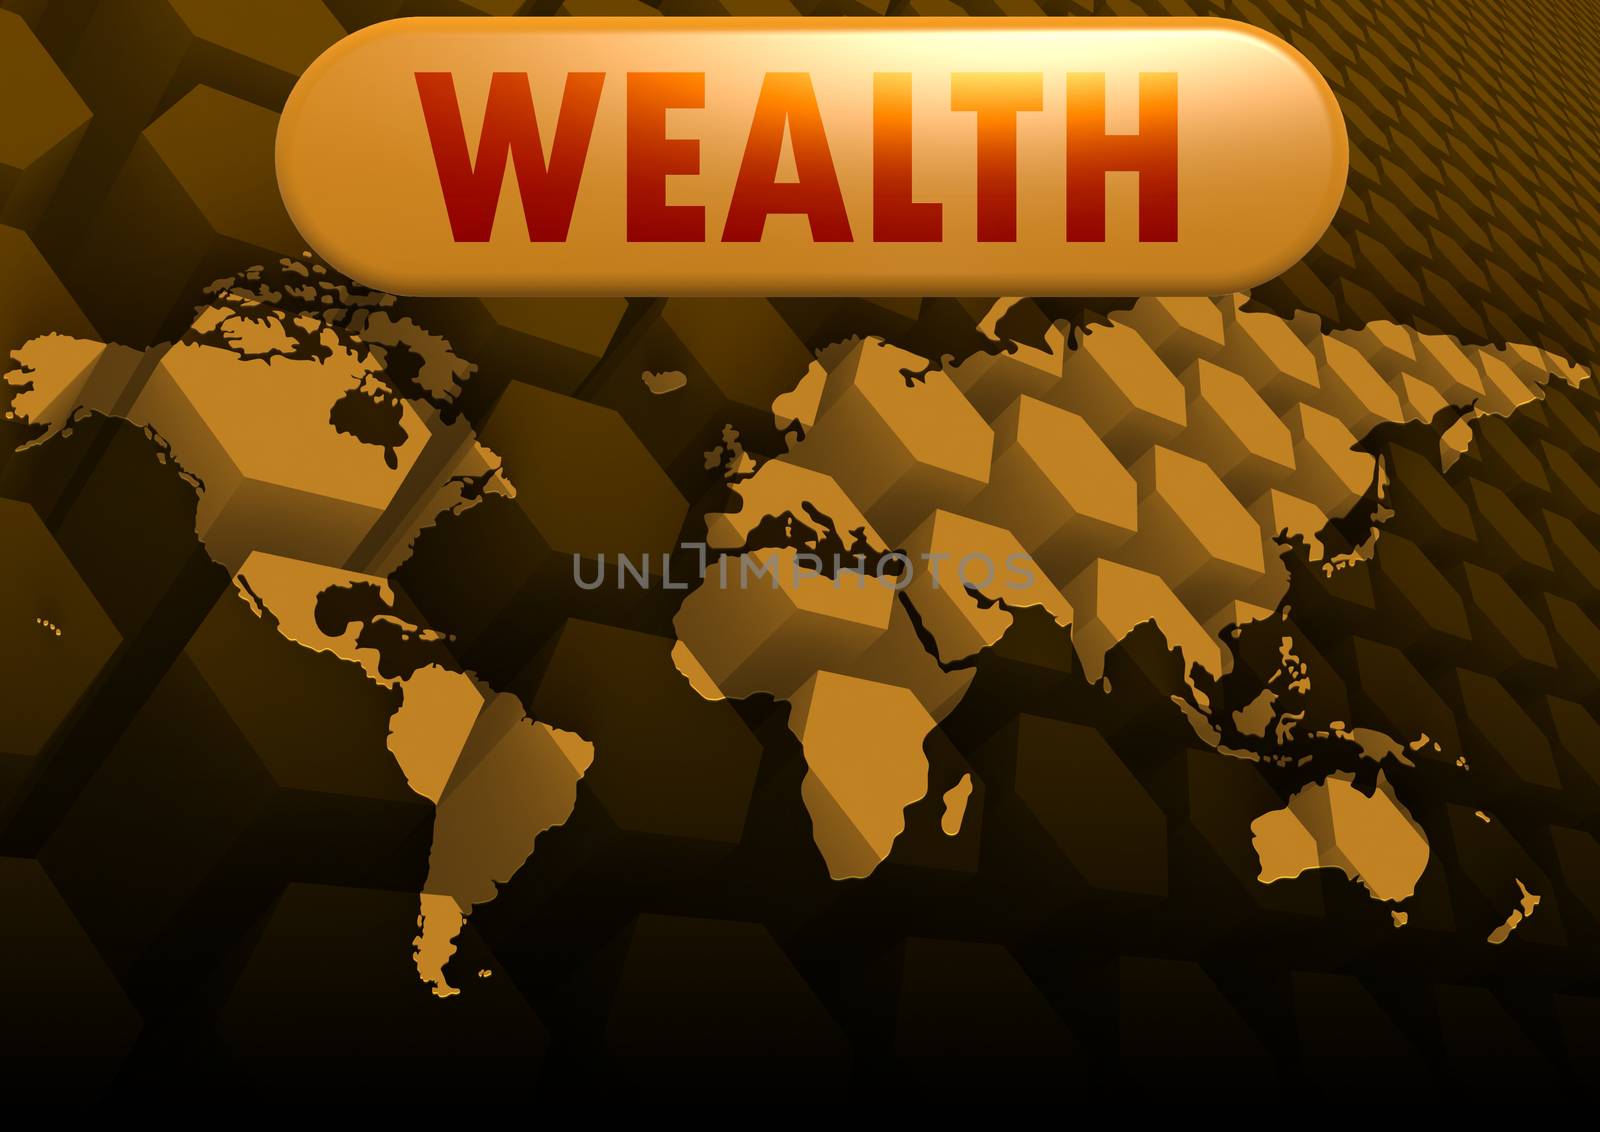 Wealth world map by tang90246